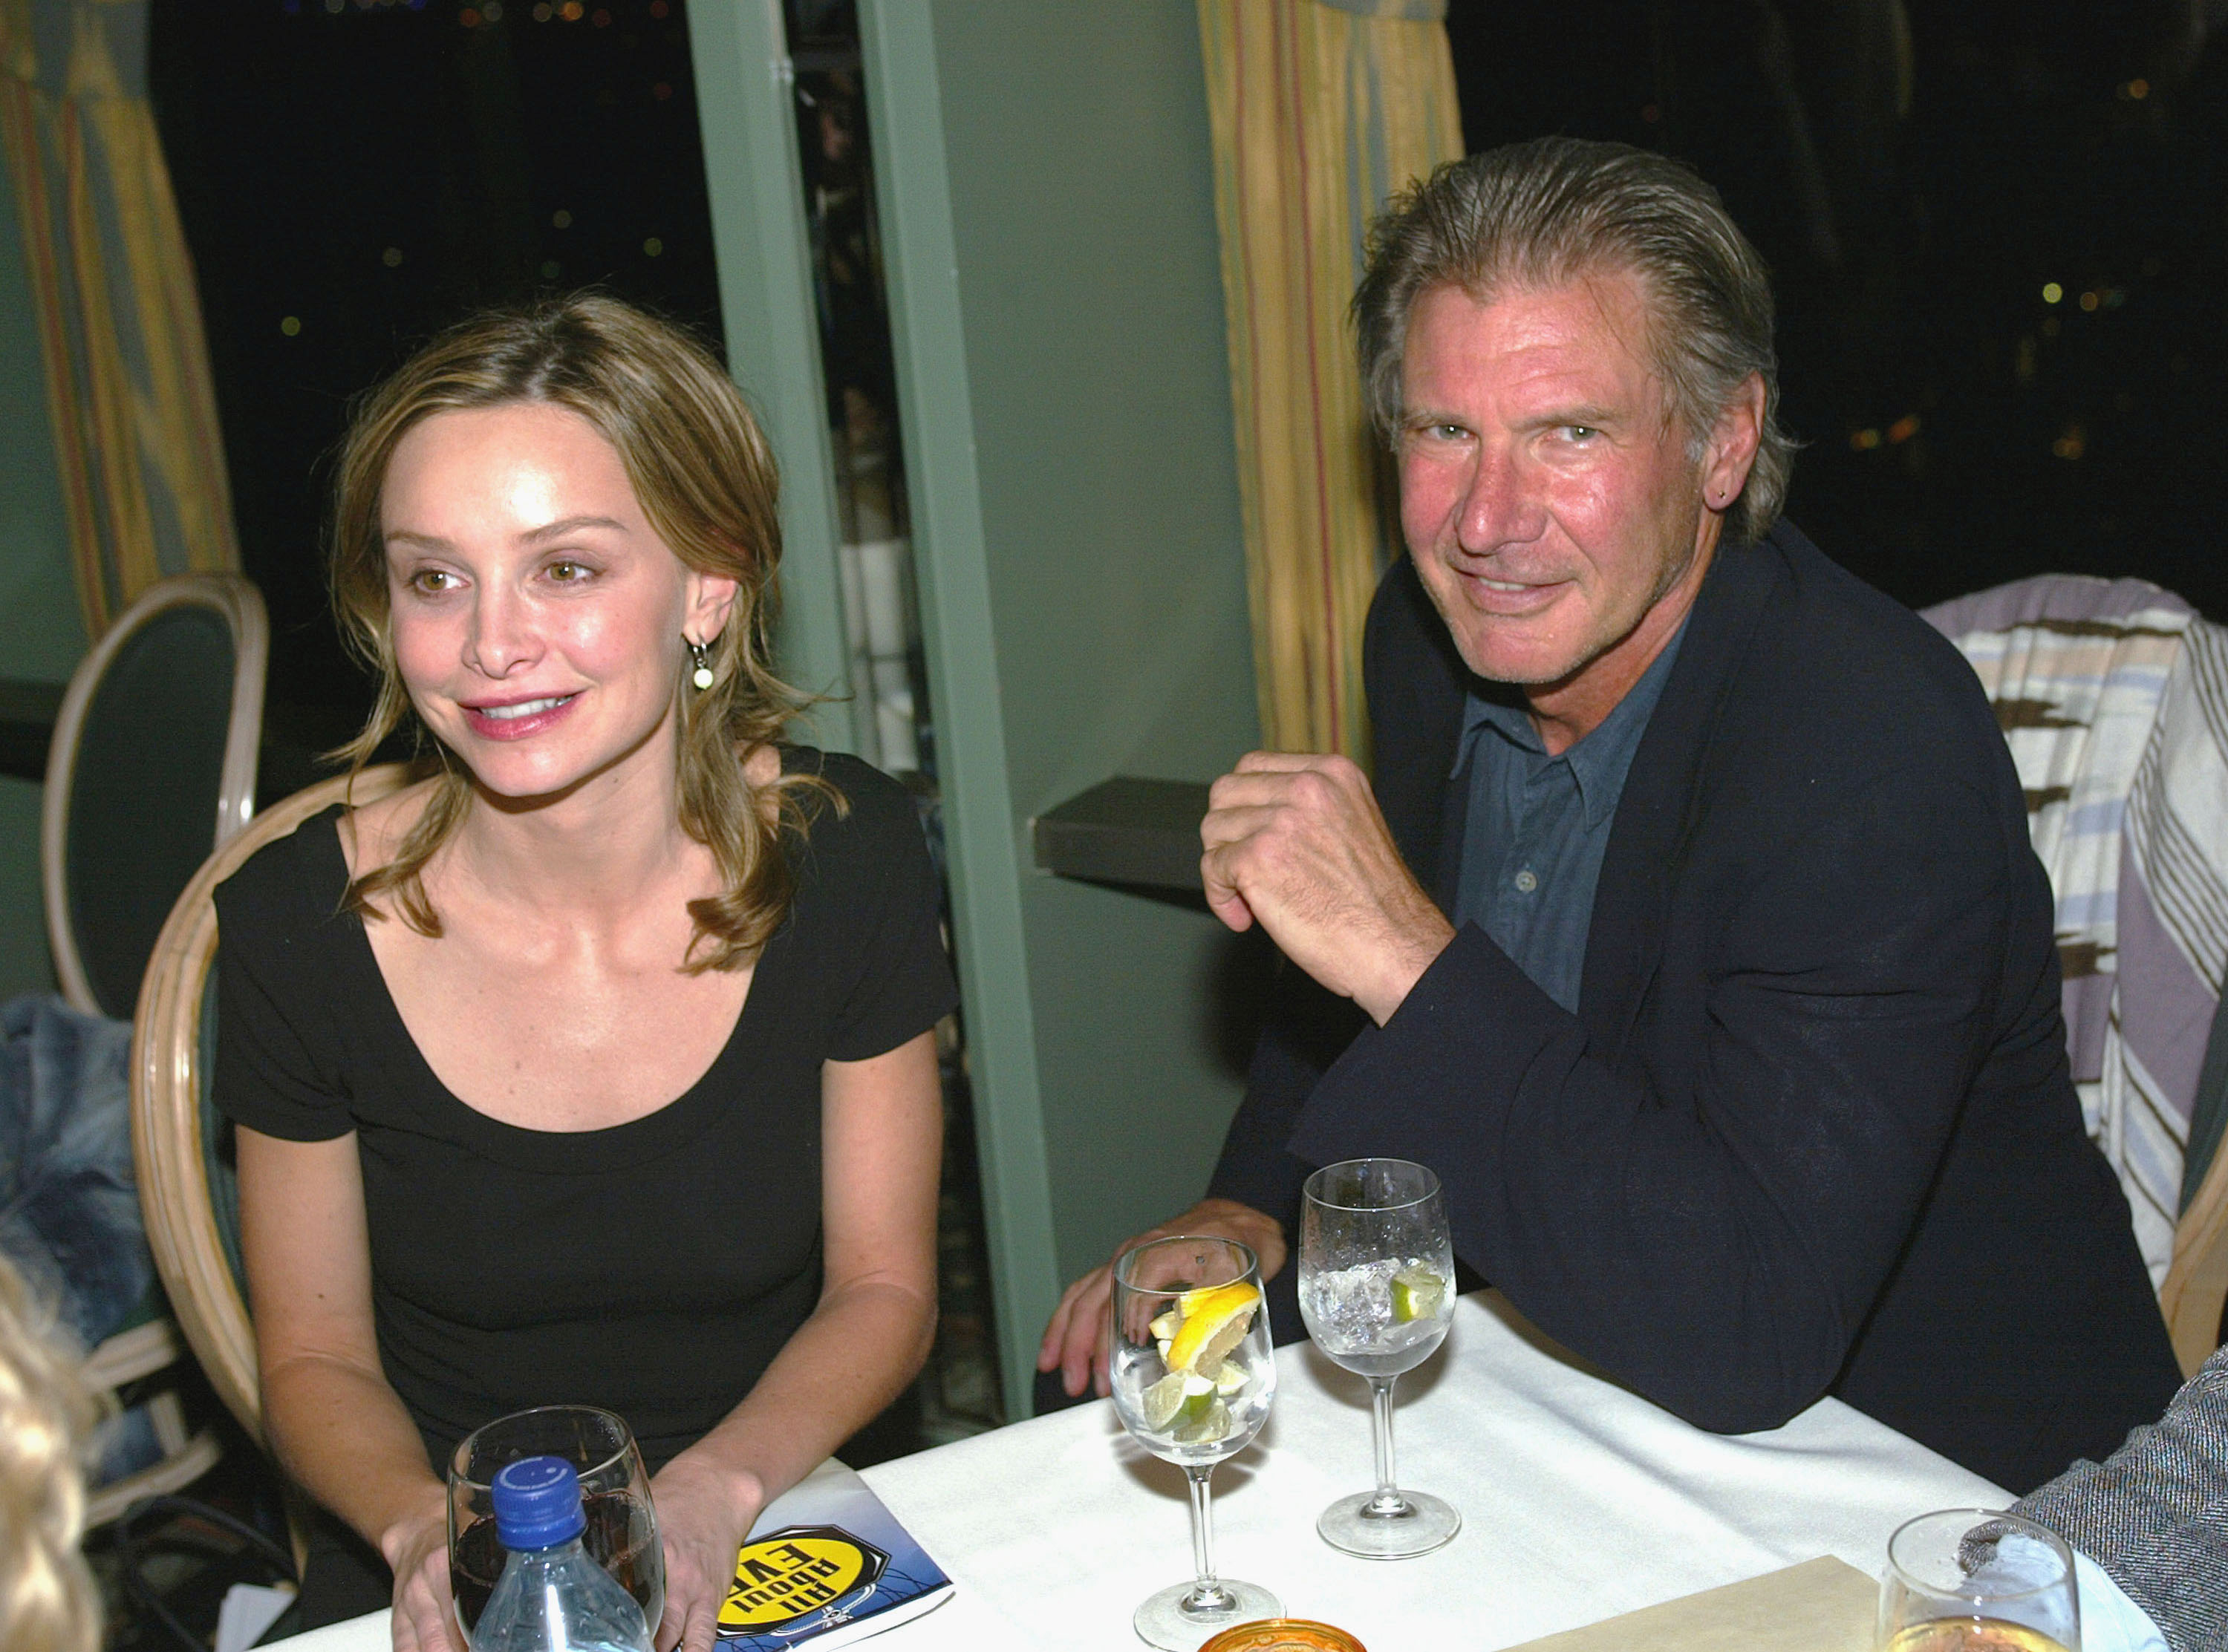 Harrison Ford and Calista Flockhart during the presentation of "All About Eve" on March 30, 2003 in Los Angeles, California | Source: Getty Images